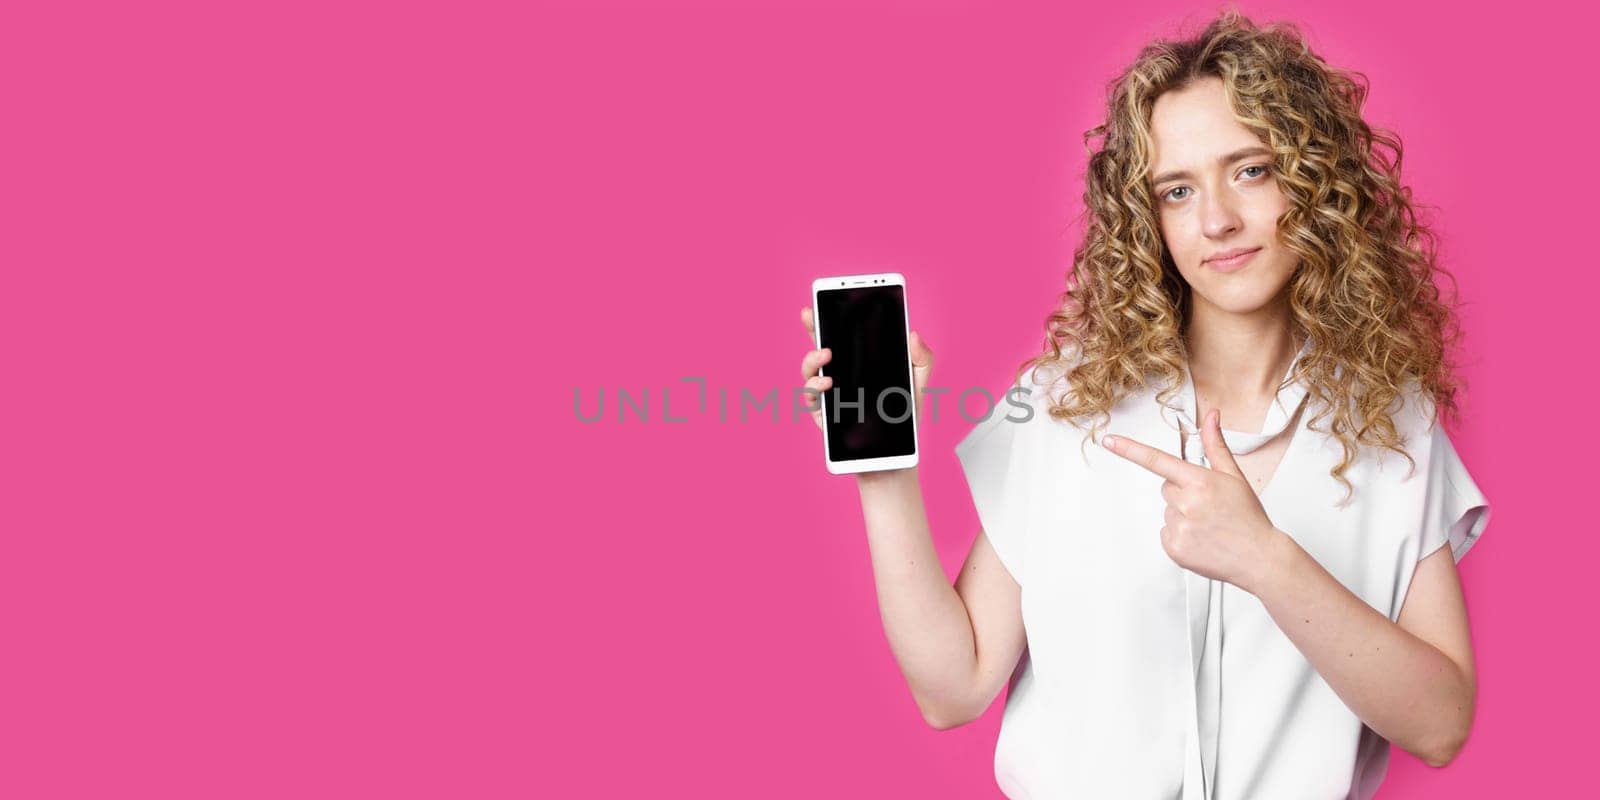 Look at this cell phone. Contented happy woman, pointing her index finger at a blank screen, shows a modern device. Isolated on a pink background. Technology concept